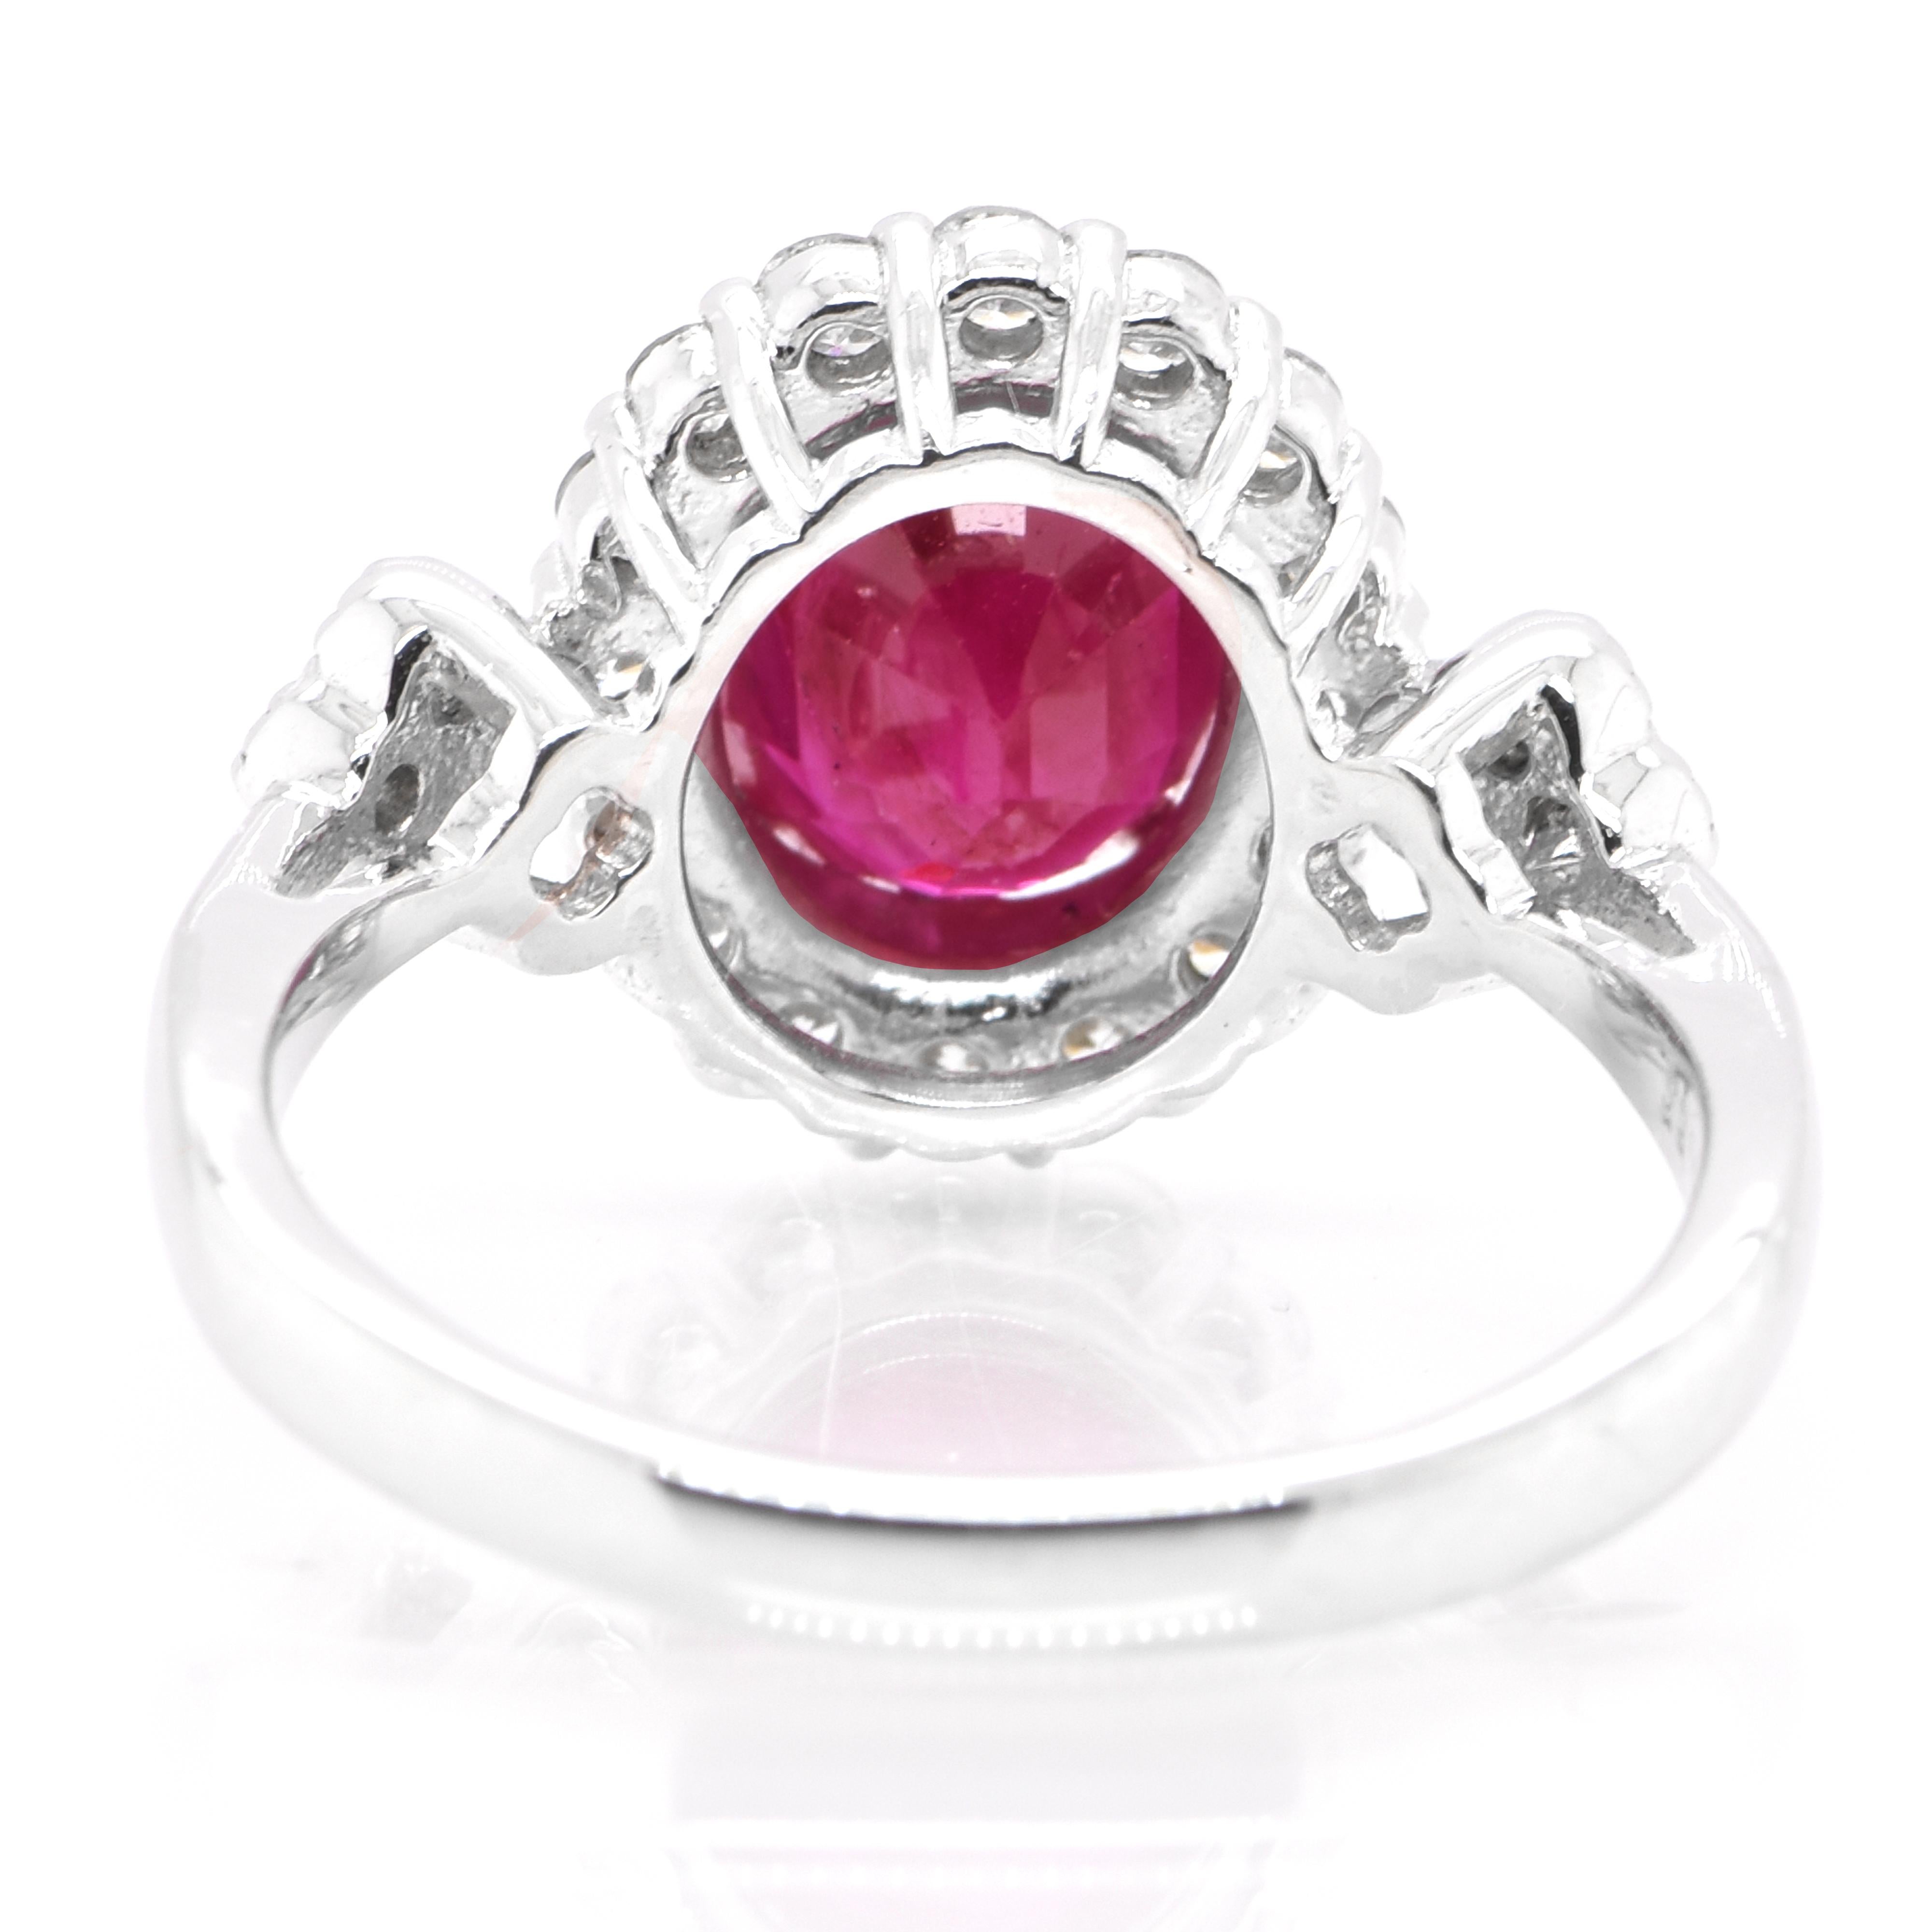 Women's GIA Certified 2.39 Carat Natural Ruby and Diamond Ring Set in Platinum For Sale